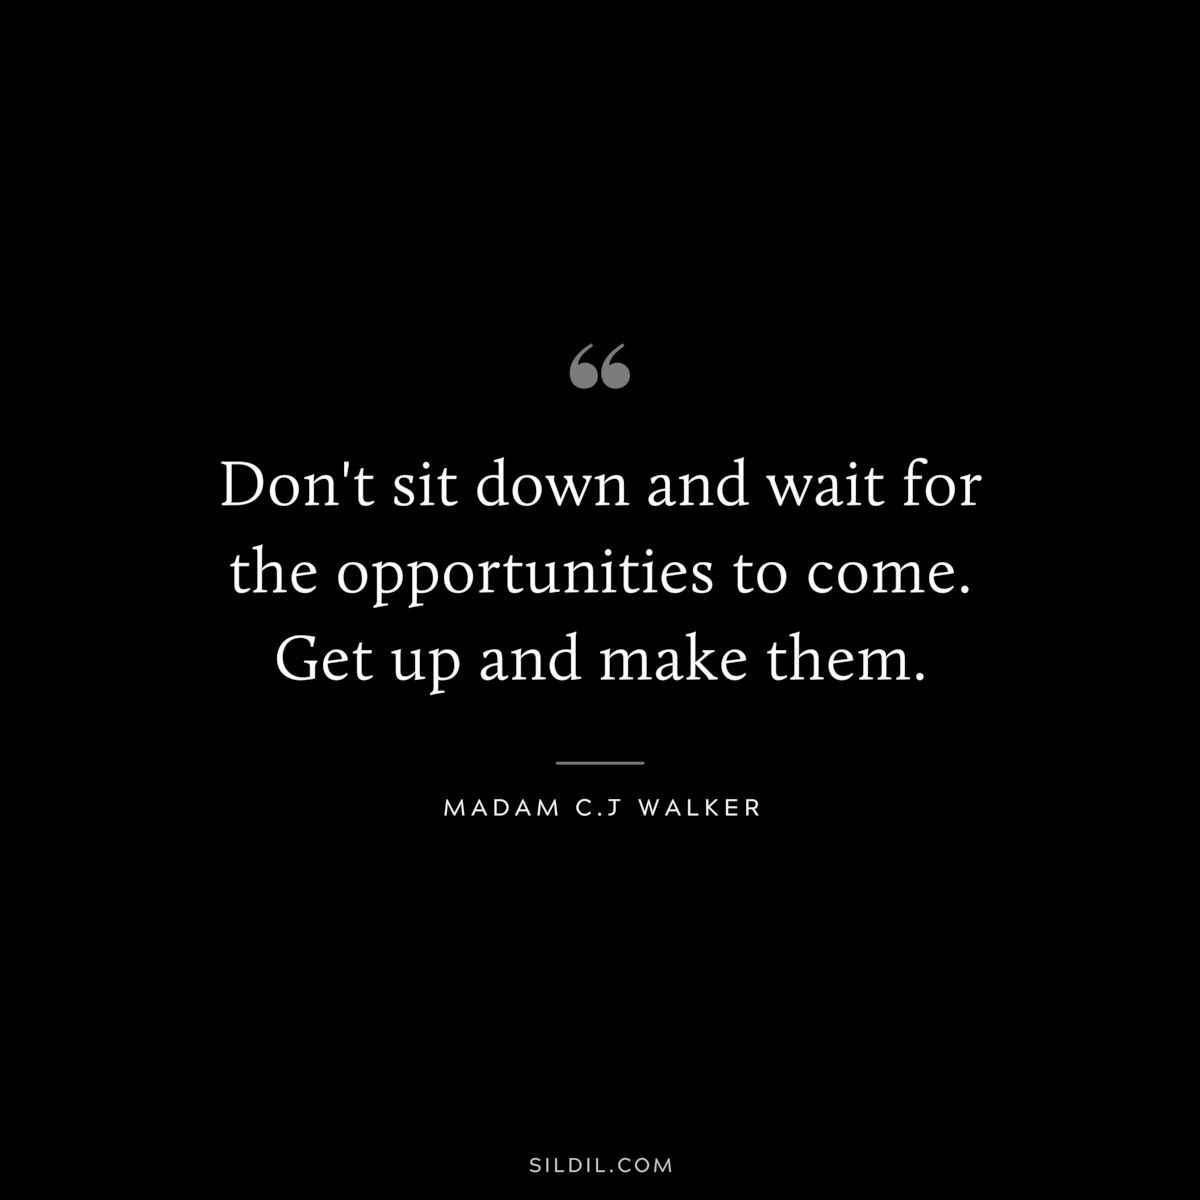 Don't sit down and wait for the opportunities to come. Get up and make them. ― Madam C.J Walker